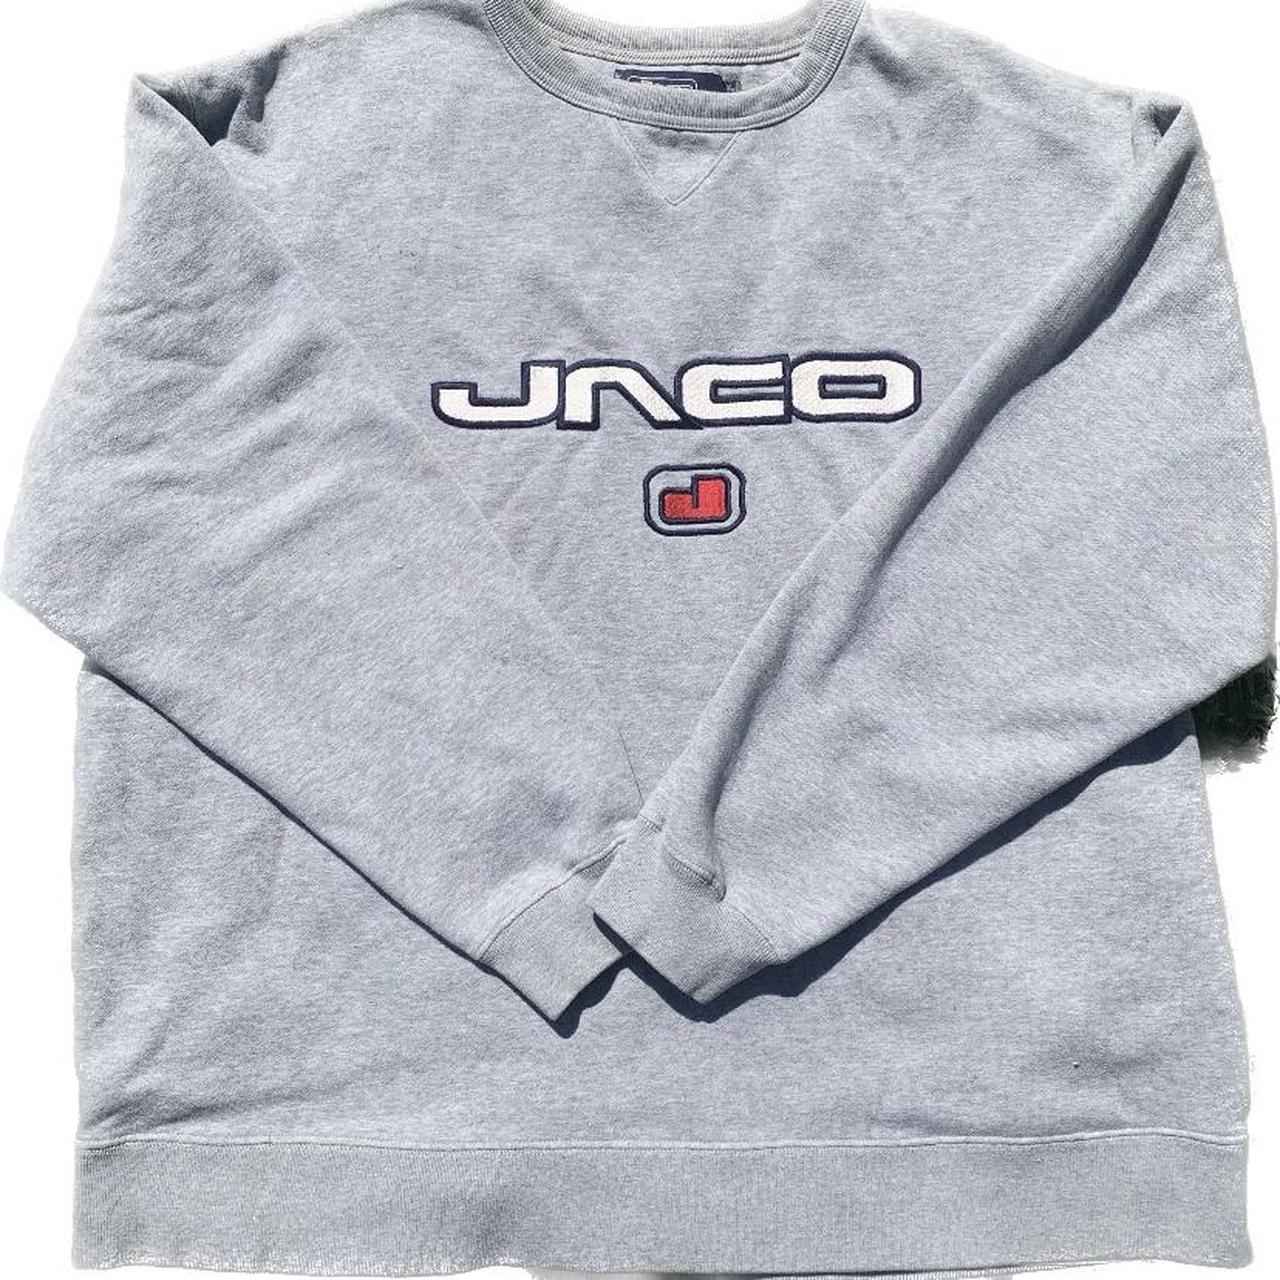 90s JNCO SWEATER in great condition for its age,... - Depop